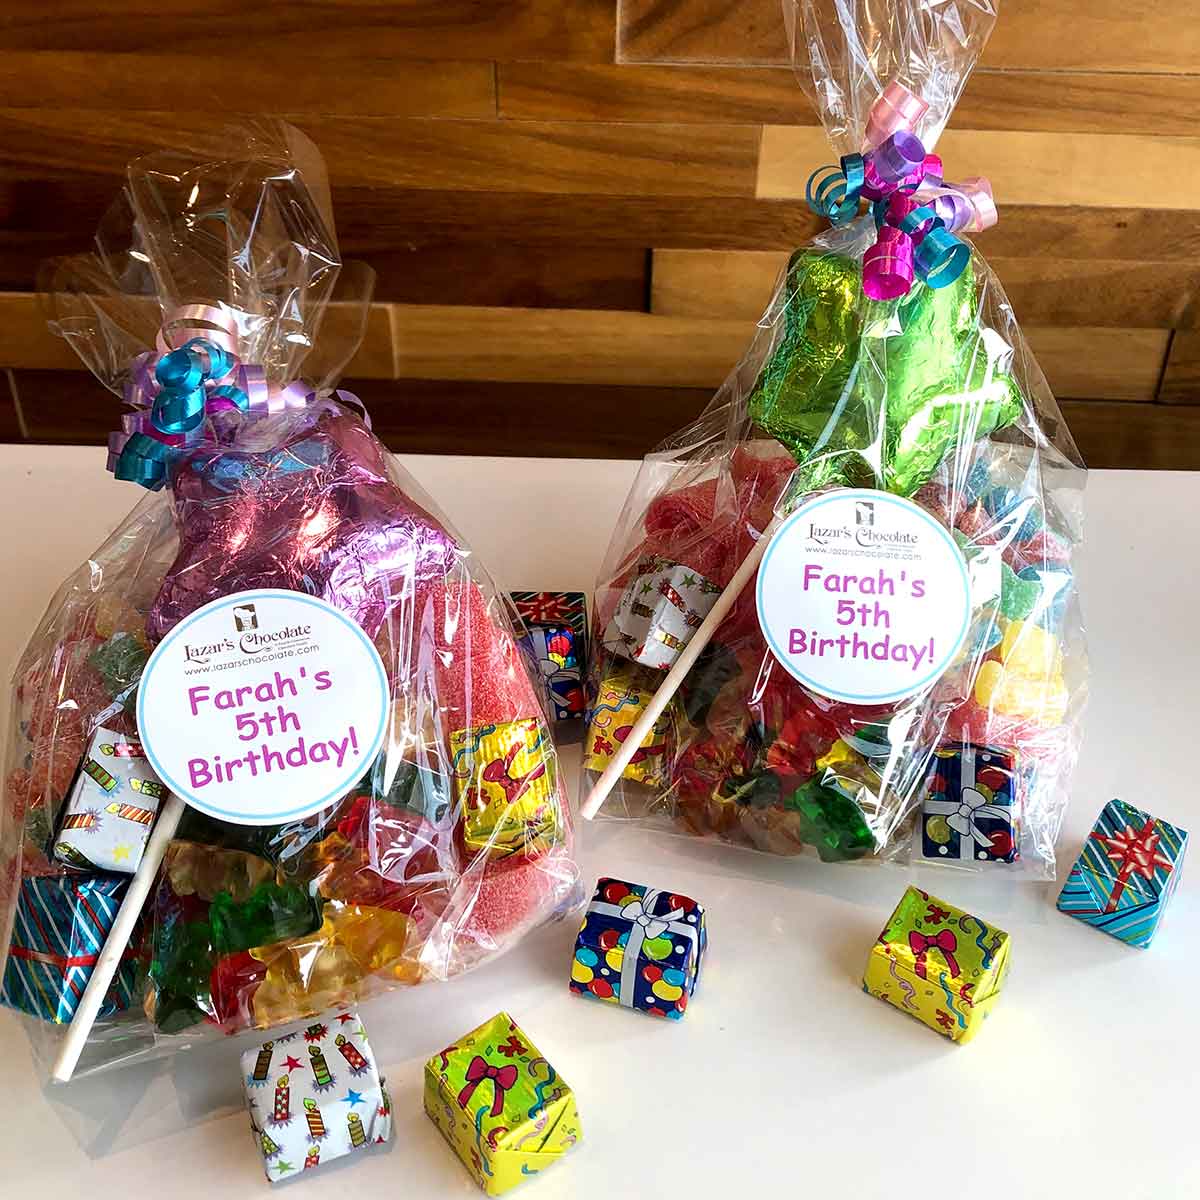 Aggregate 85+ candy gift bags - in.cdgdbentre